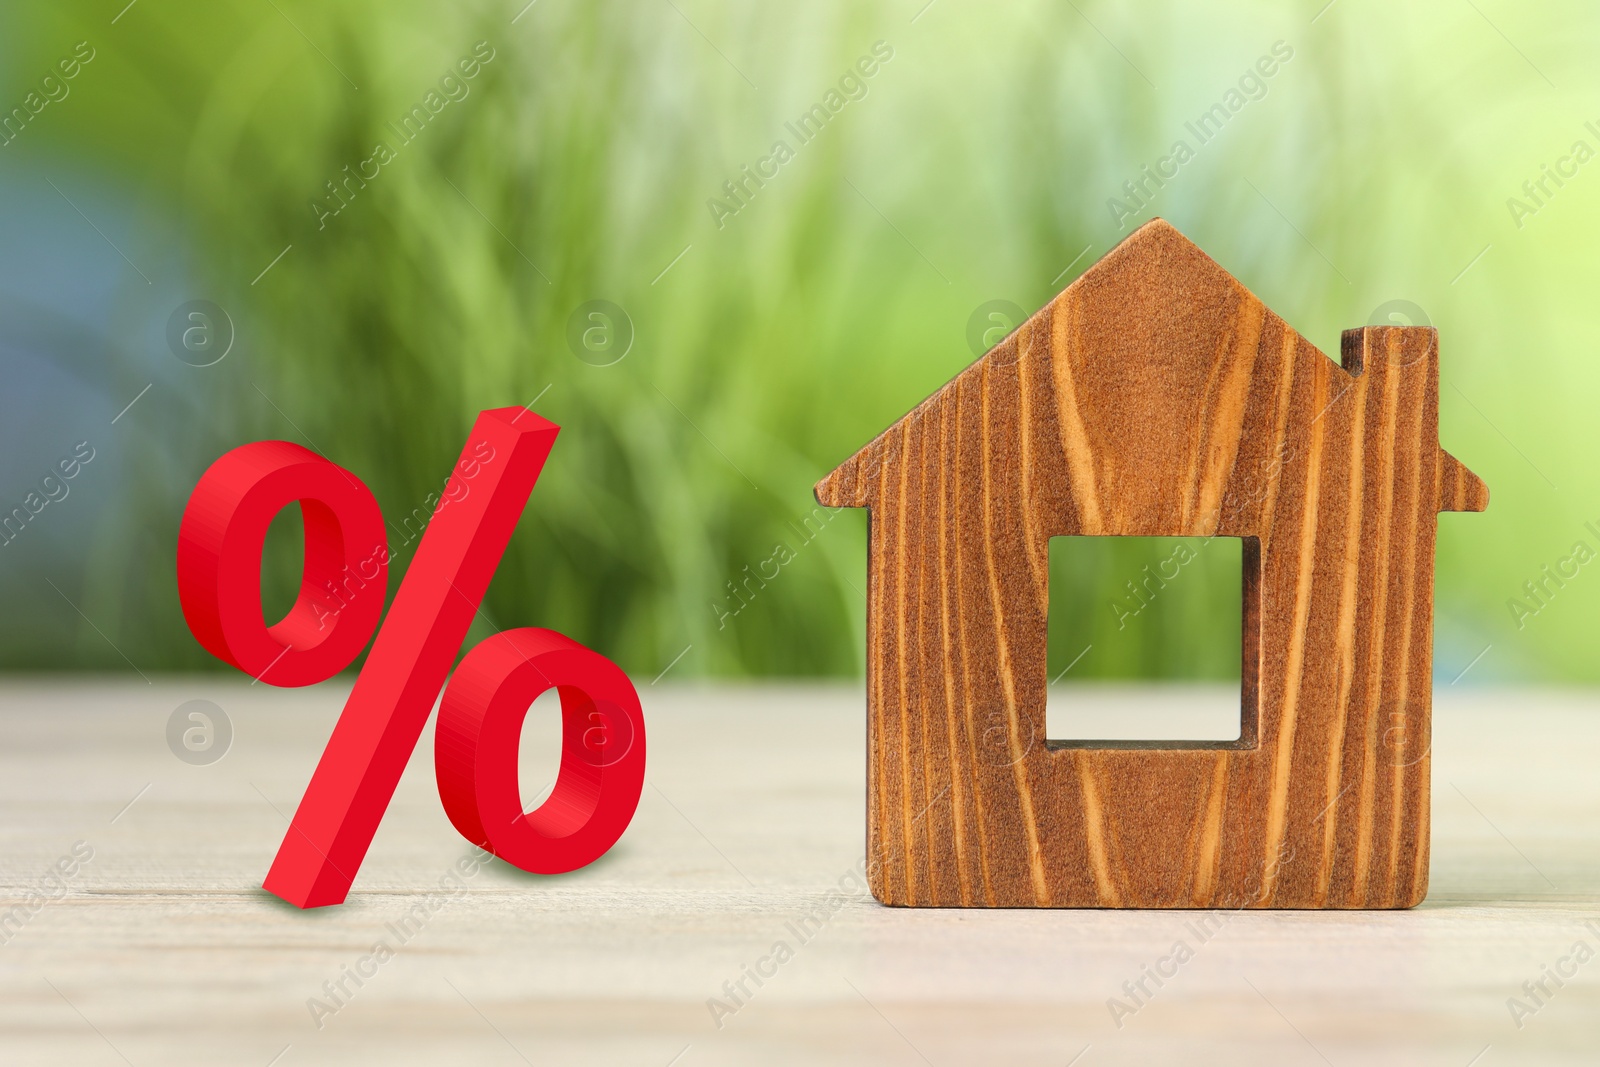 Image of Mortgage rate. Wooden model of house and percent sign on table